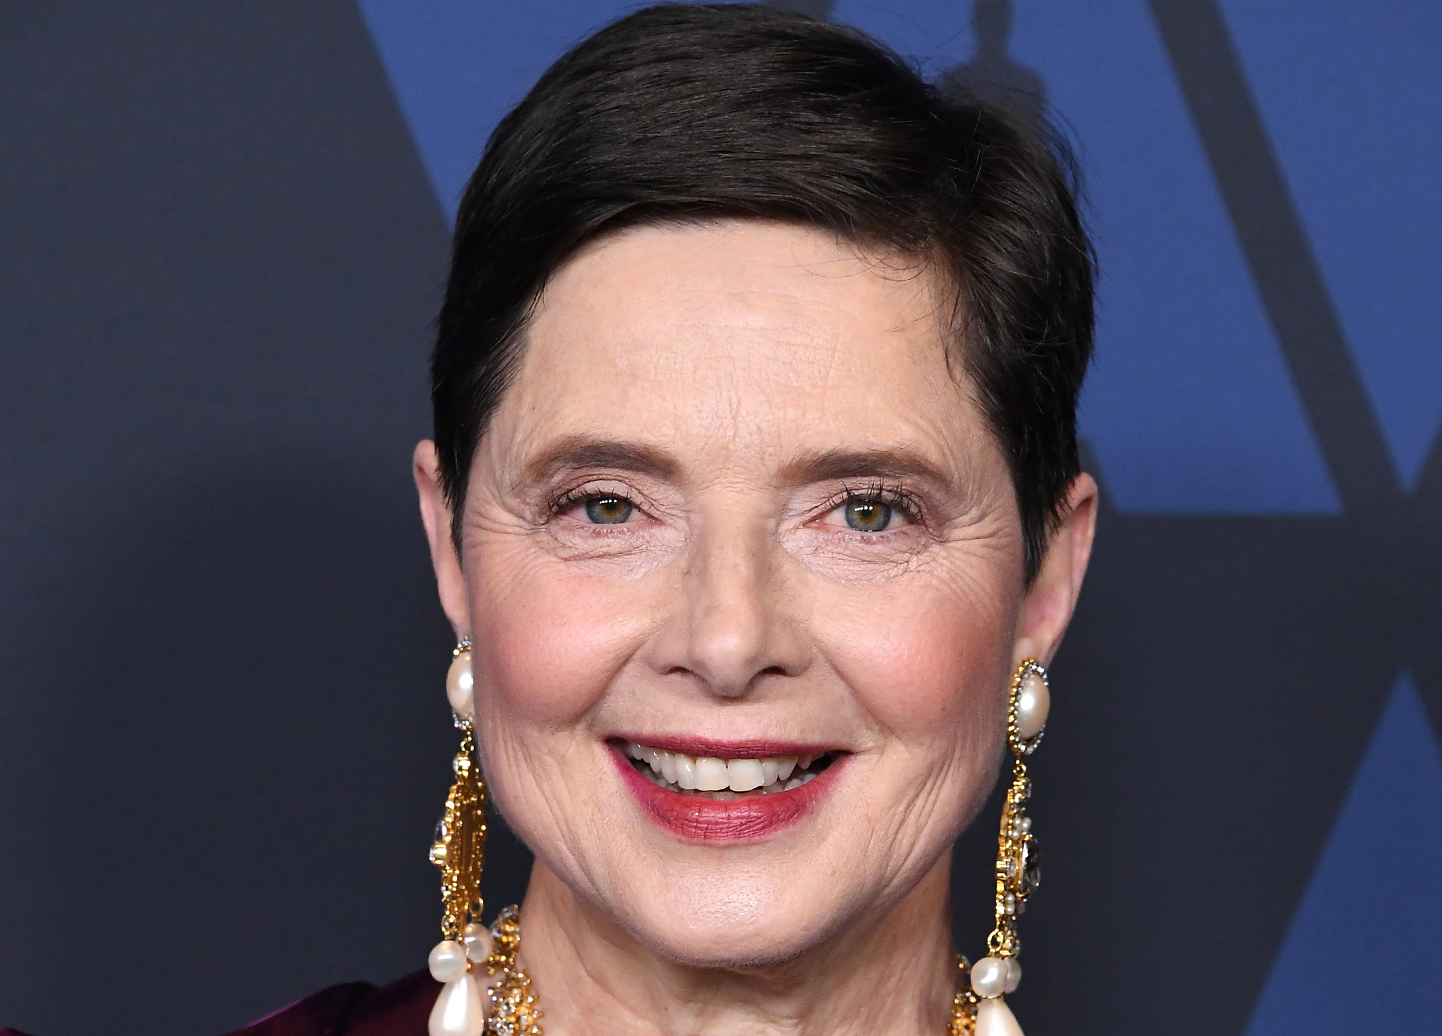 Last night, Isabella Rossellini treated members of her Lancôme family and f...